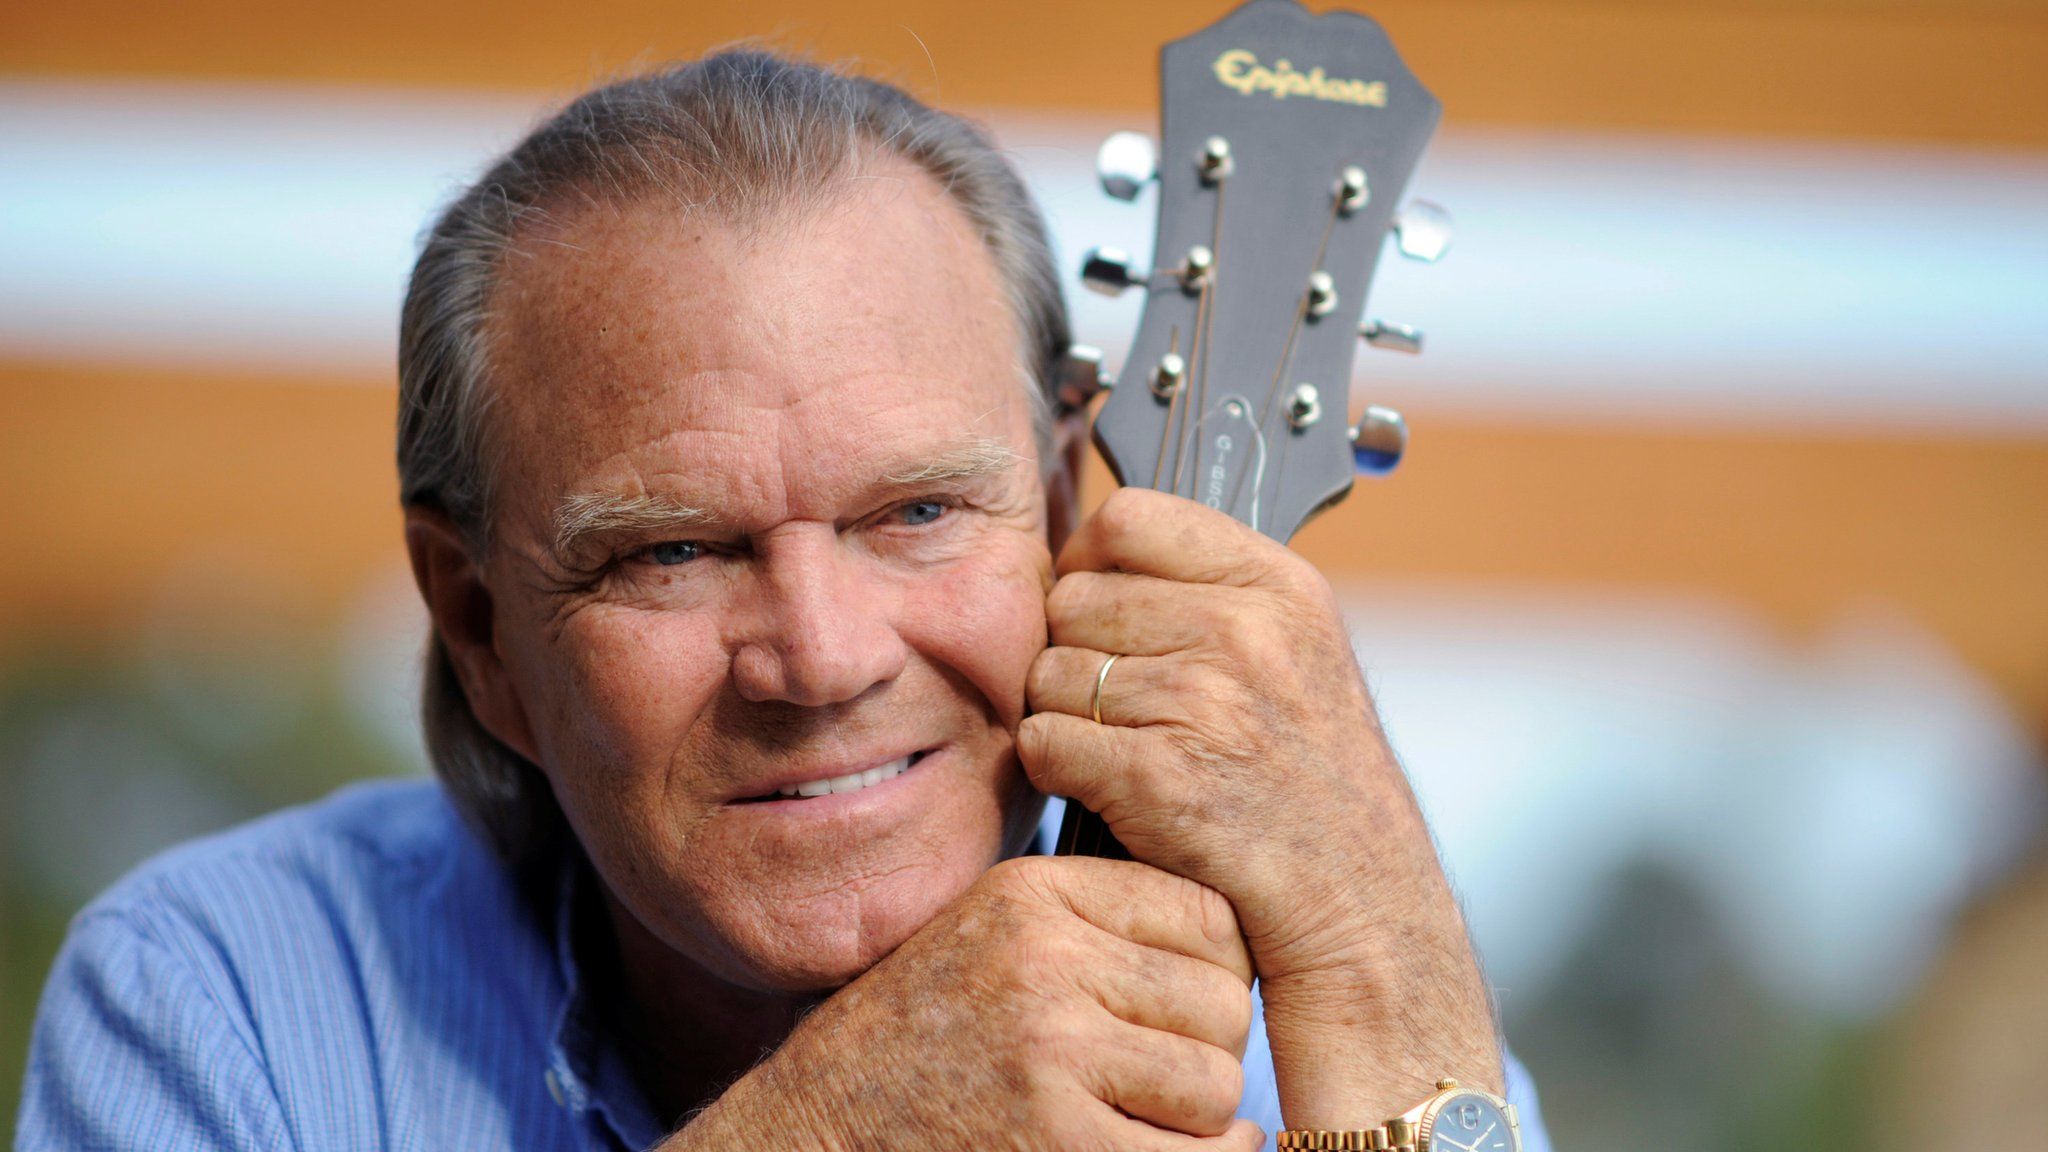 Recording artist Glen Campbell is photographed at his home in Malibu, California, in August 2008